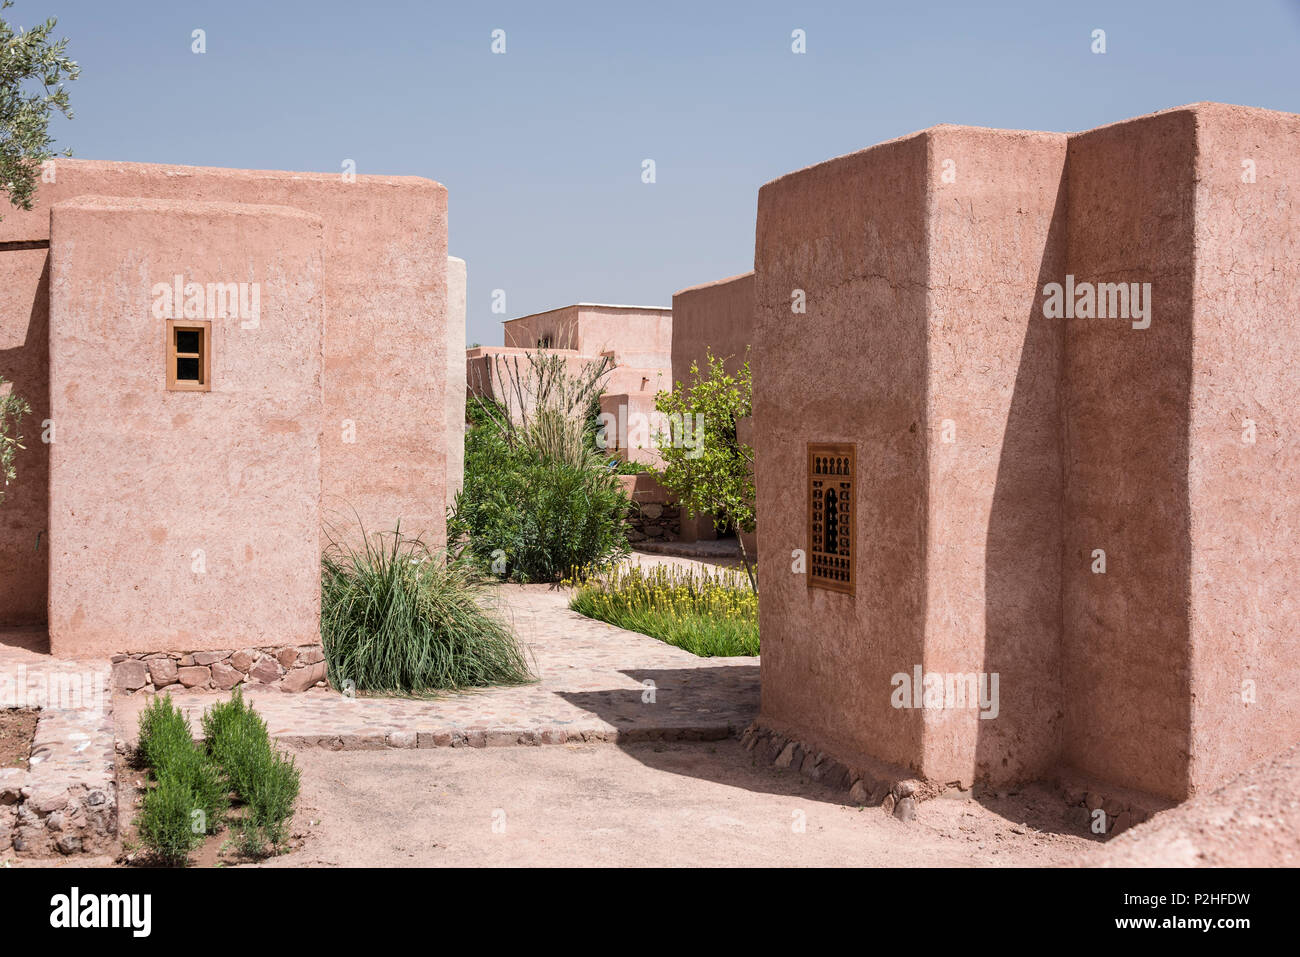 Exterior facade of adobe Berber style lodges with courtyard of lemon trees, bamboo and moroccan wild plants Stock Photo